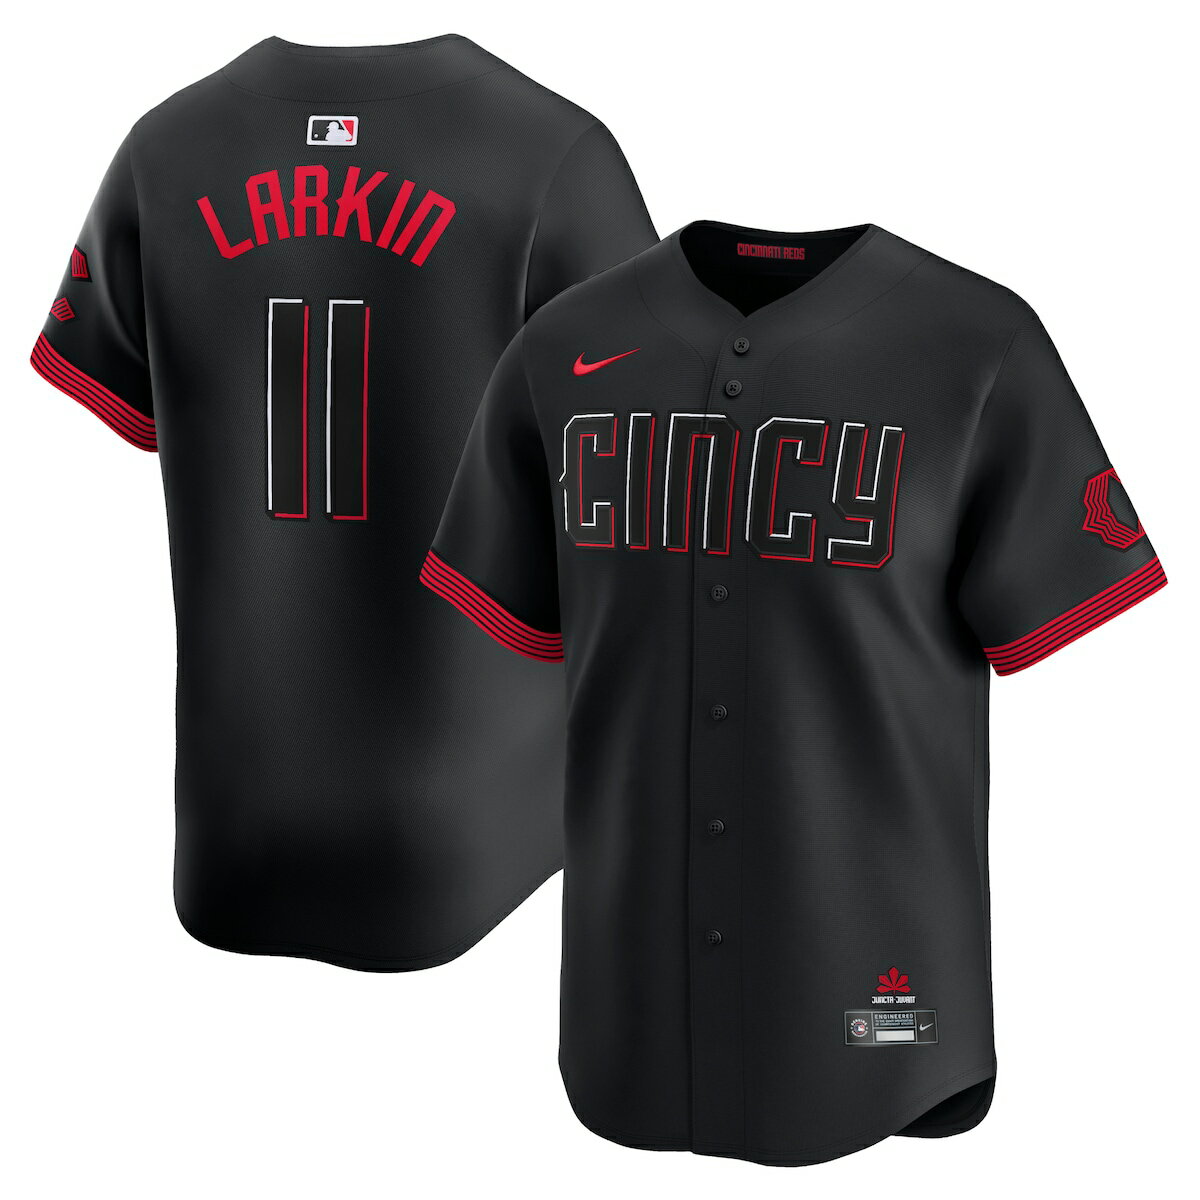 MLB bY o[E[L VeBRlNg ~ebh jtH[ Nike iCL Y ubN (Nike Mens Limited City Connect Player Jersey - Carryover)